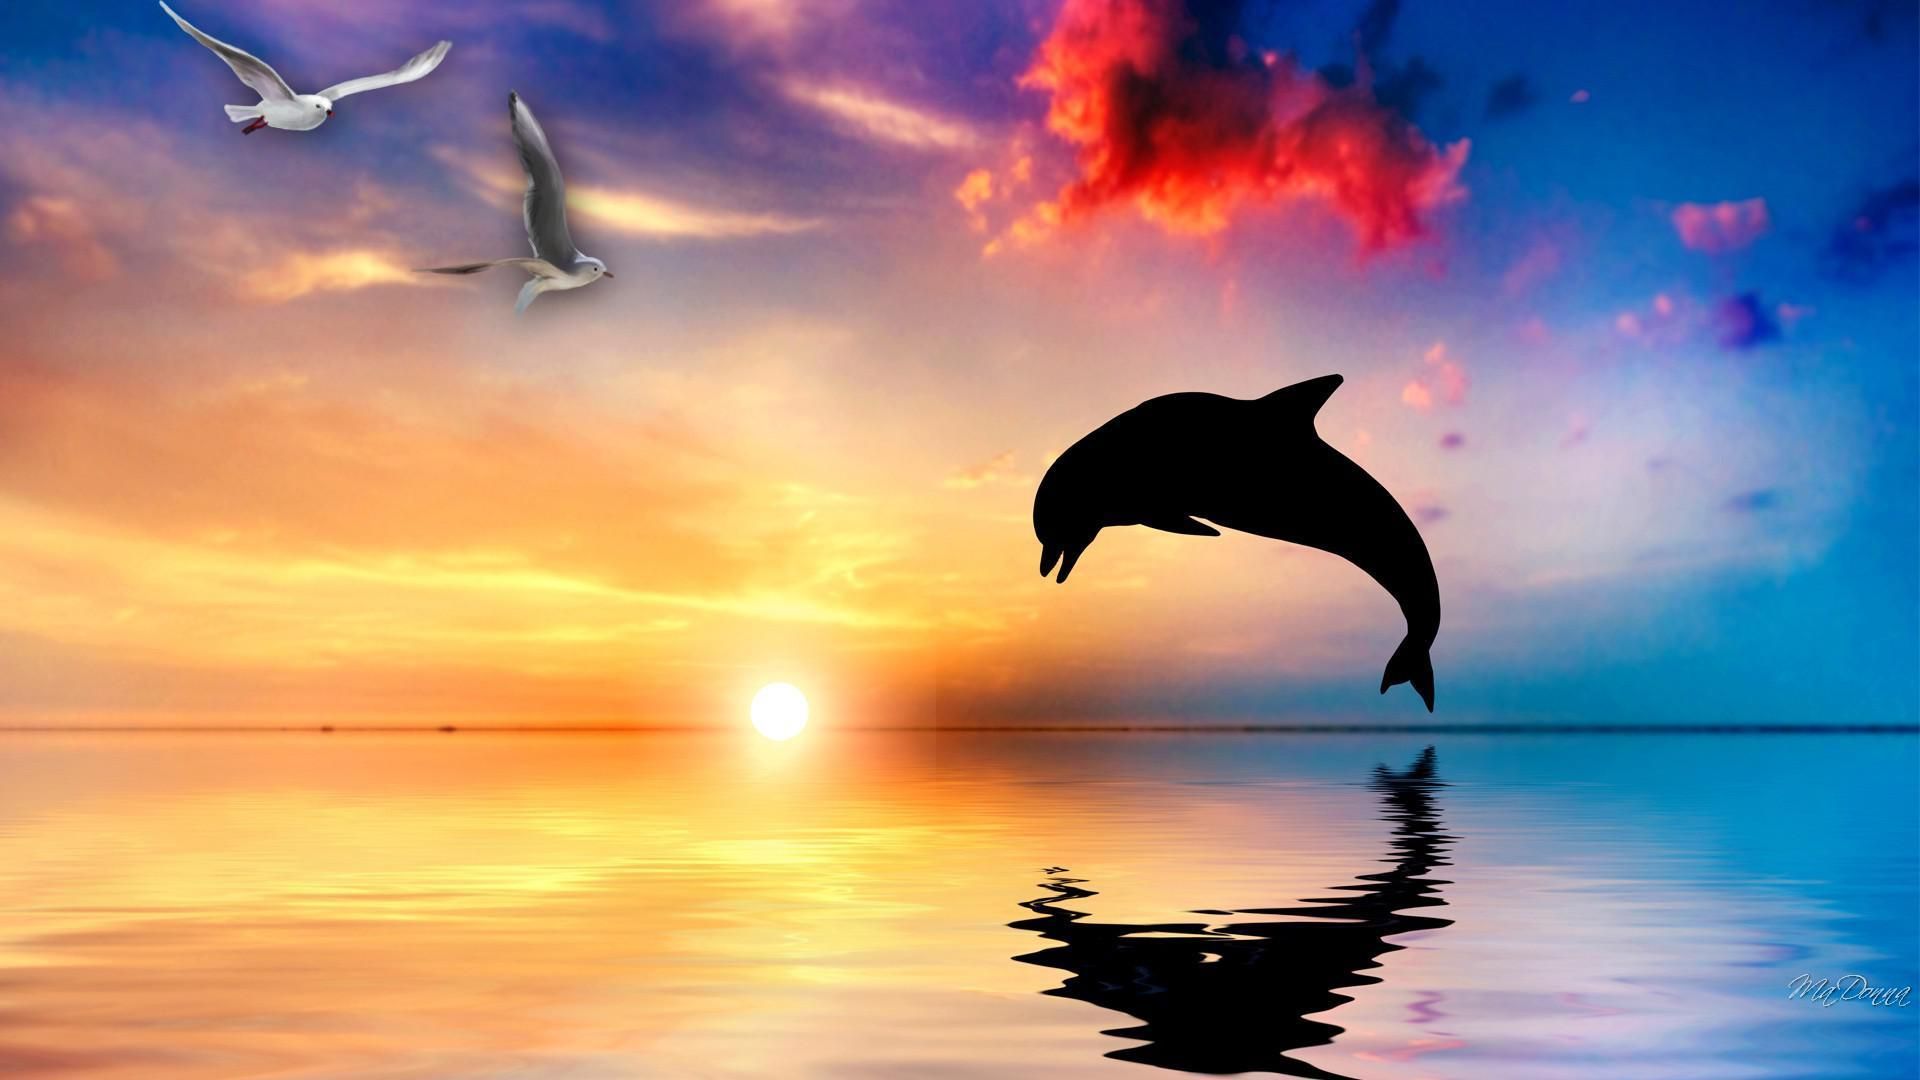 Dolphin Wallpapers | Best Wallpapers